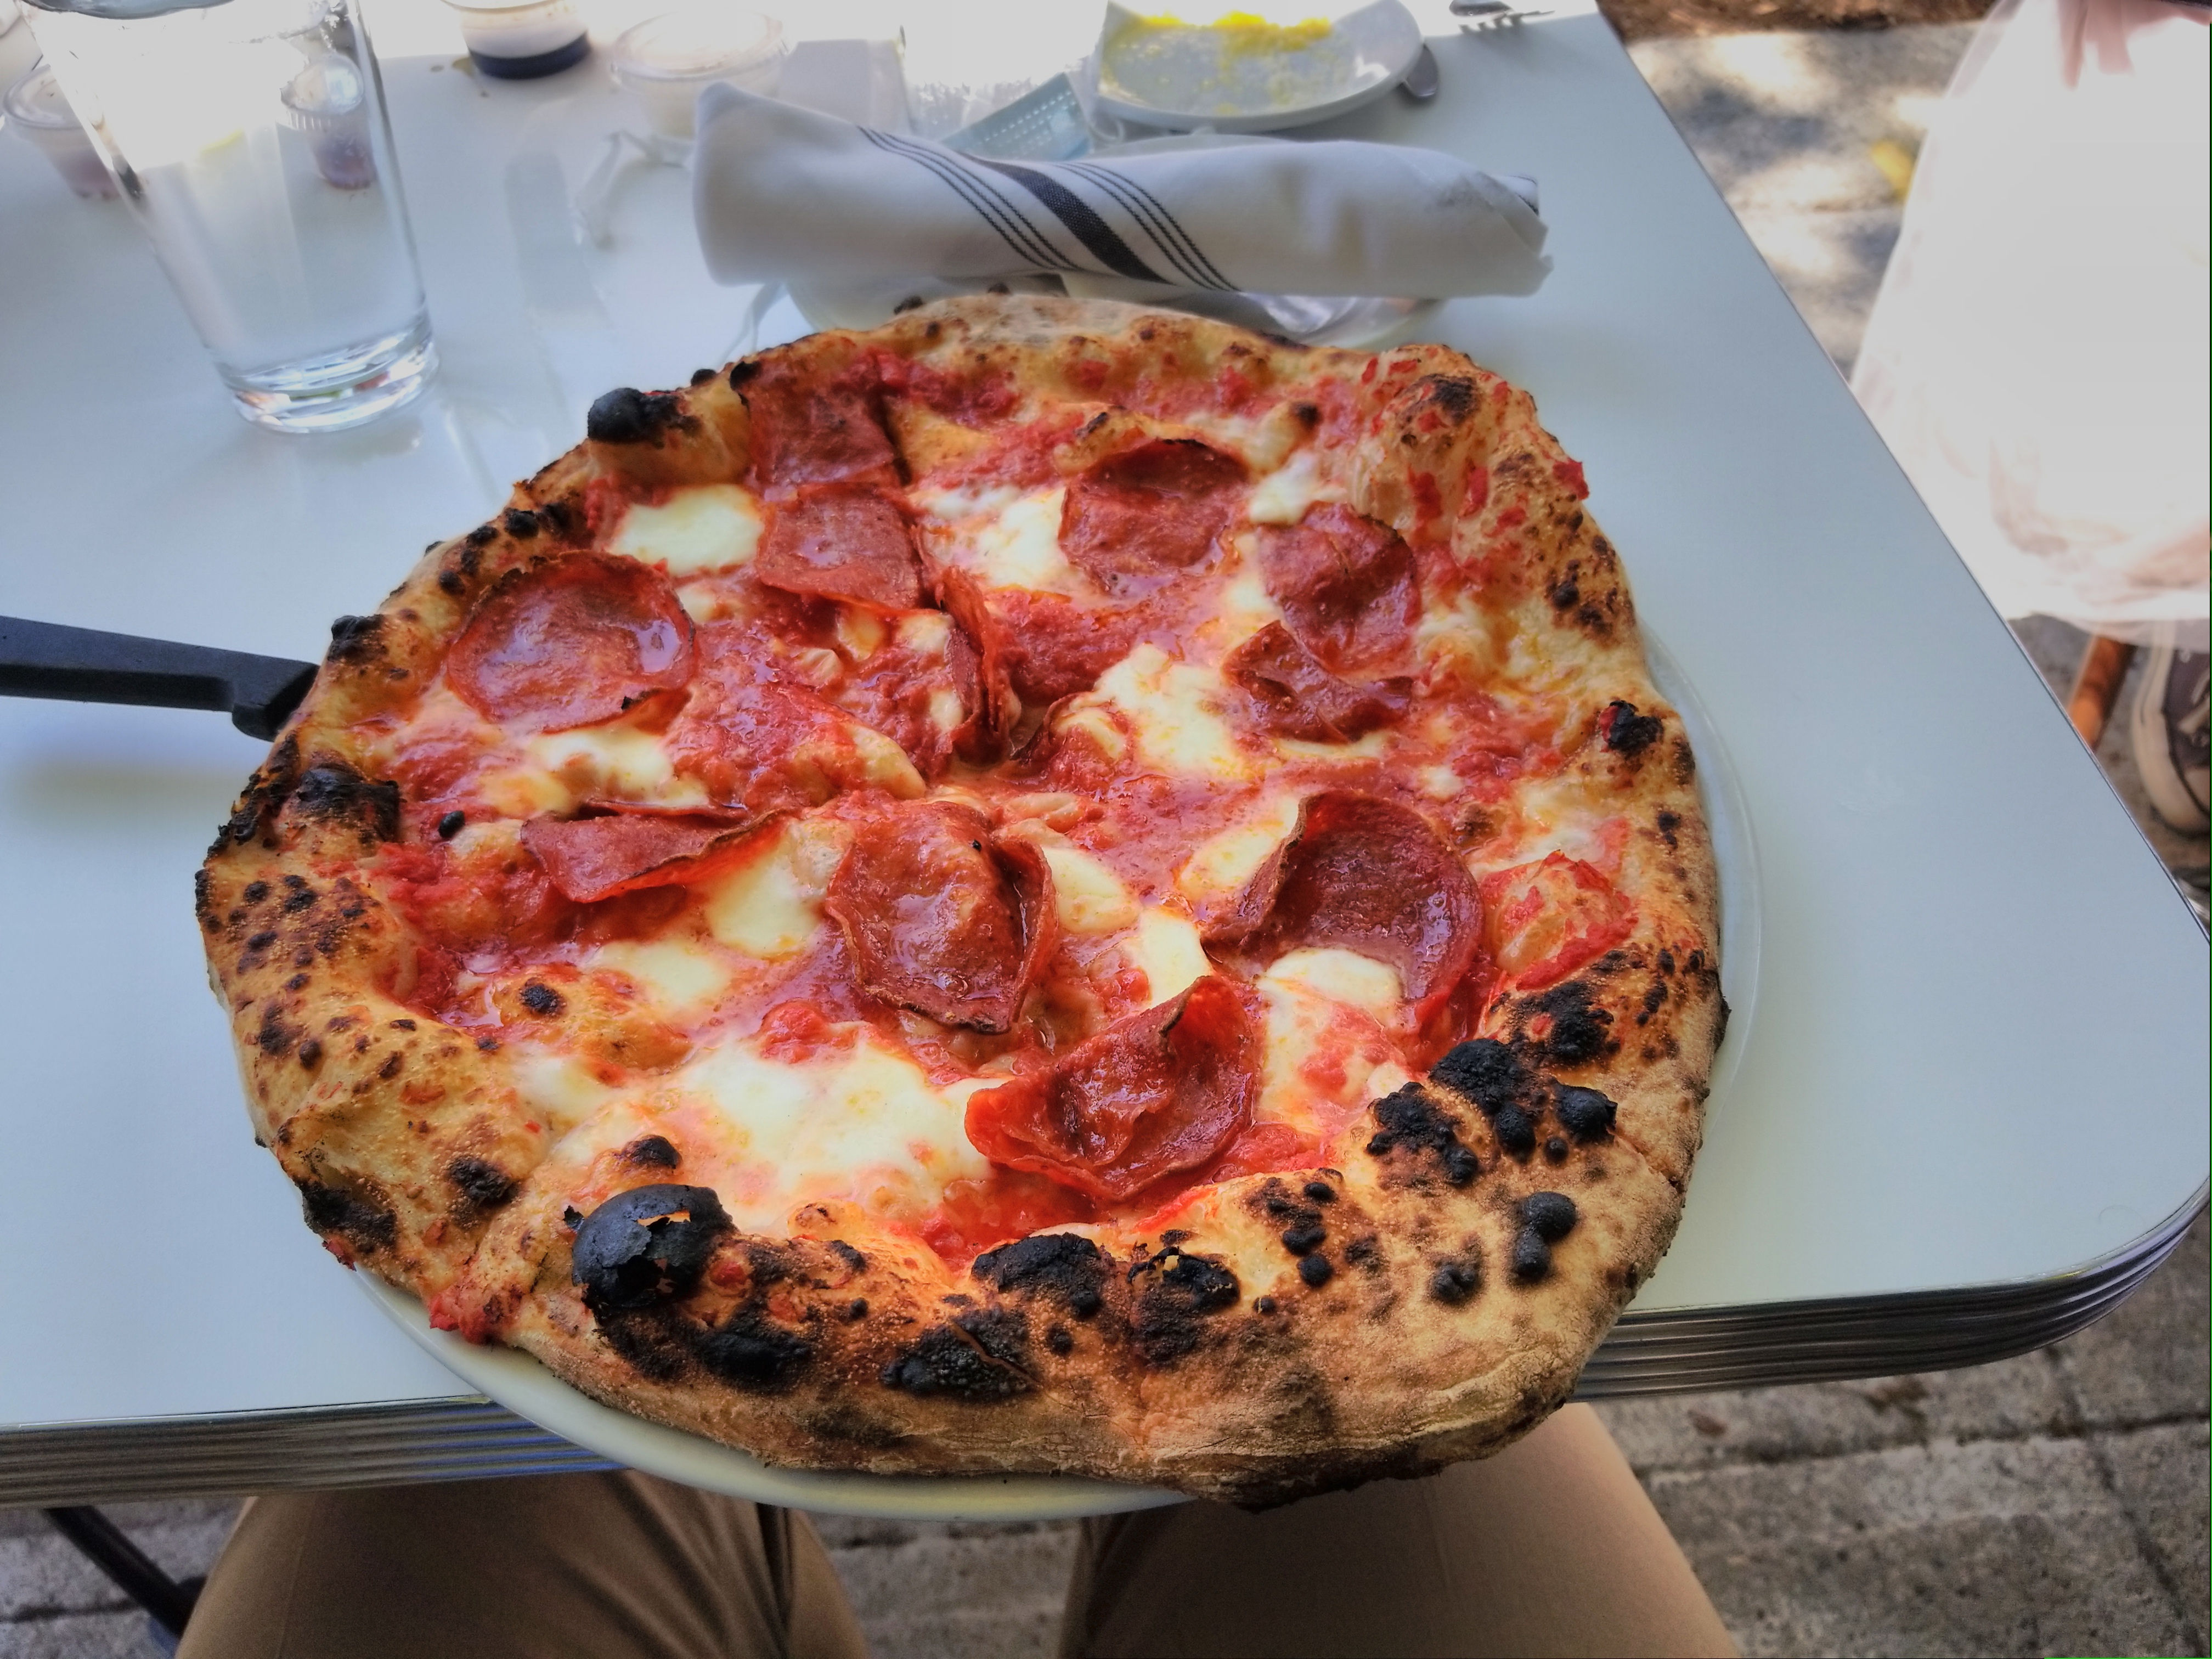 The best Italian round pizza served on a table - an experience included in the Providence's Very Delicious Lunch Tour.